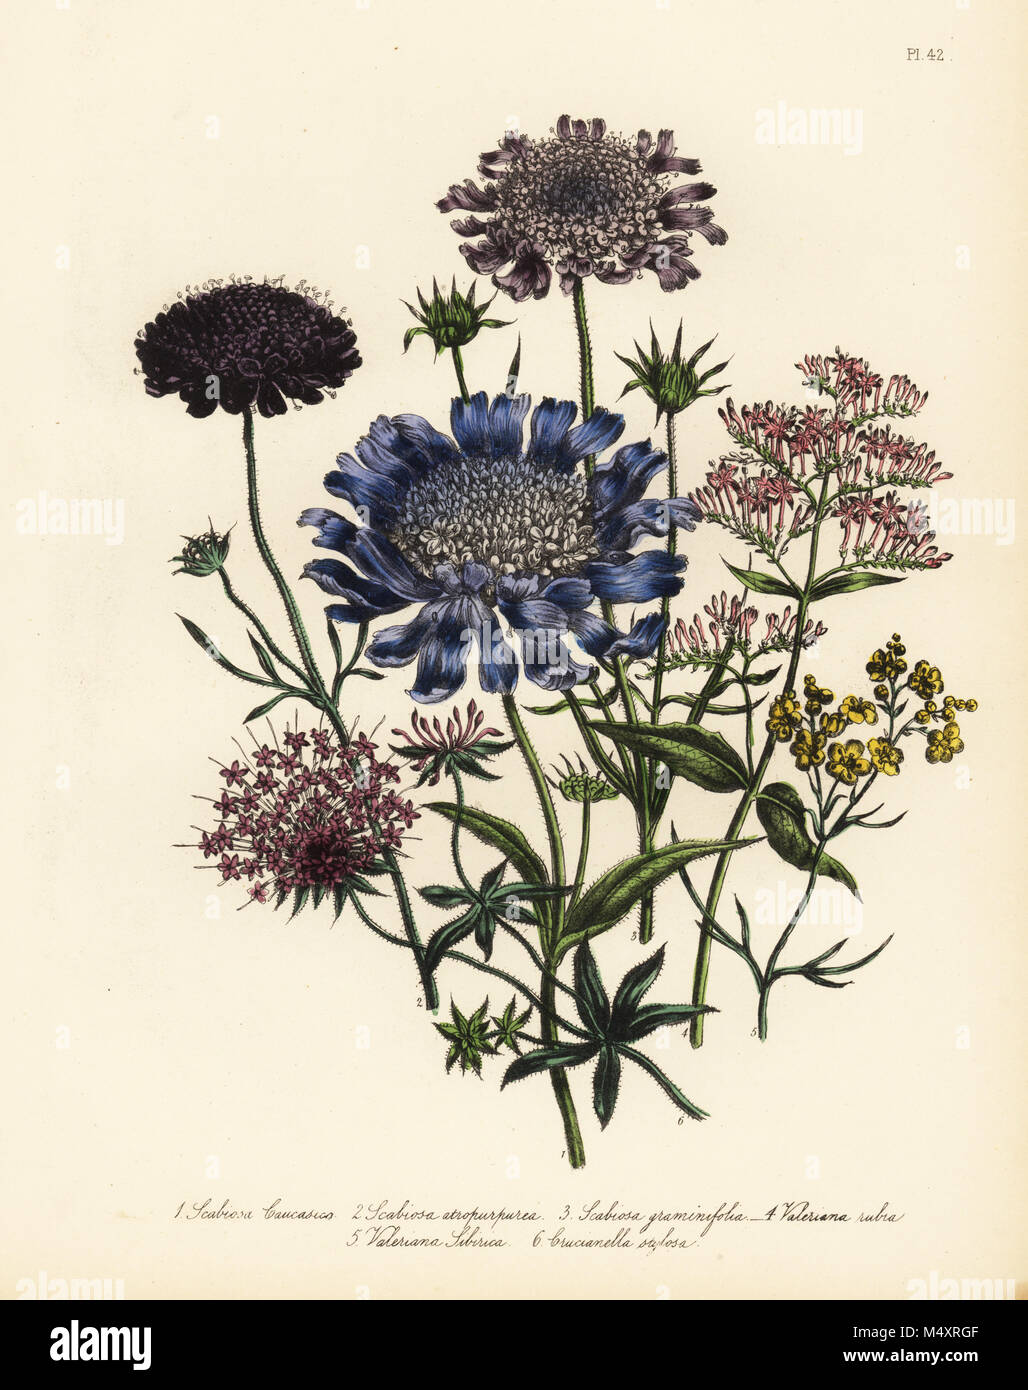 Caucasian scabious, Scabiosa caucasia, common sweet scabious, Scabiosa atropurpurea, grass-leaved scabious, Scabiosa graminifolia, Valeriana rubra, Siberian valerian, V. sibirica, and long-styled crosswort, Crucianella stilosa. Handfinished chromolithograph by Henry Noel Humphreys after an illustration by Jane Loudon from Mrs. Jane Loudon's Ladies Flower Garden of Ornamental Perennials, William S. Orr, London, 1849. Stock Photo